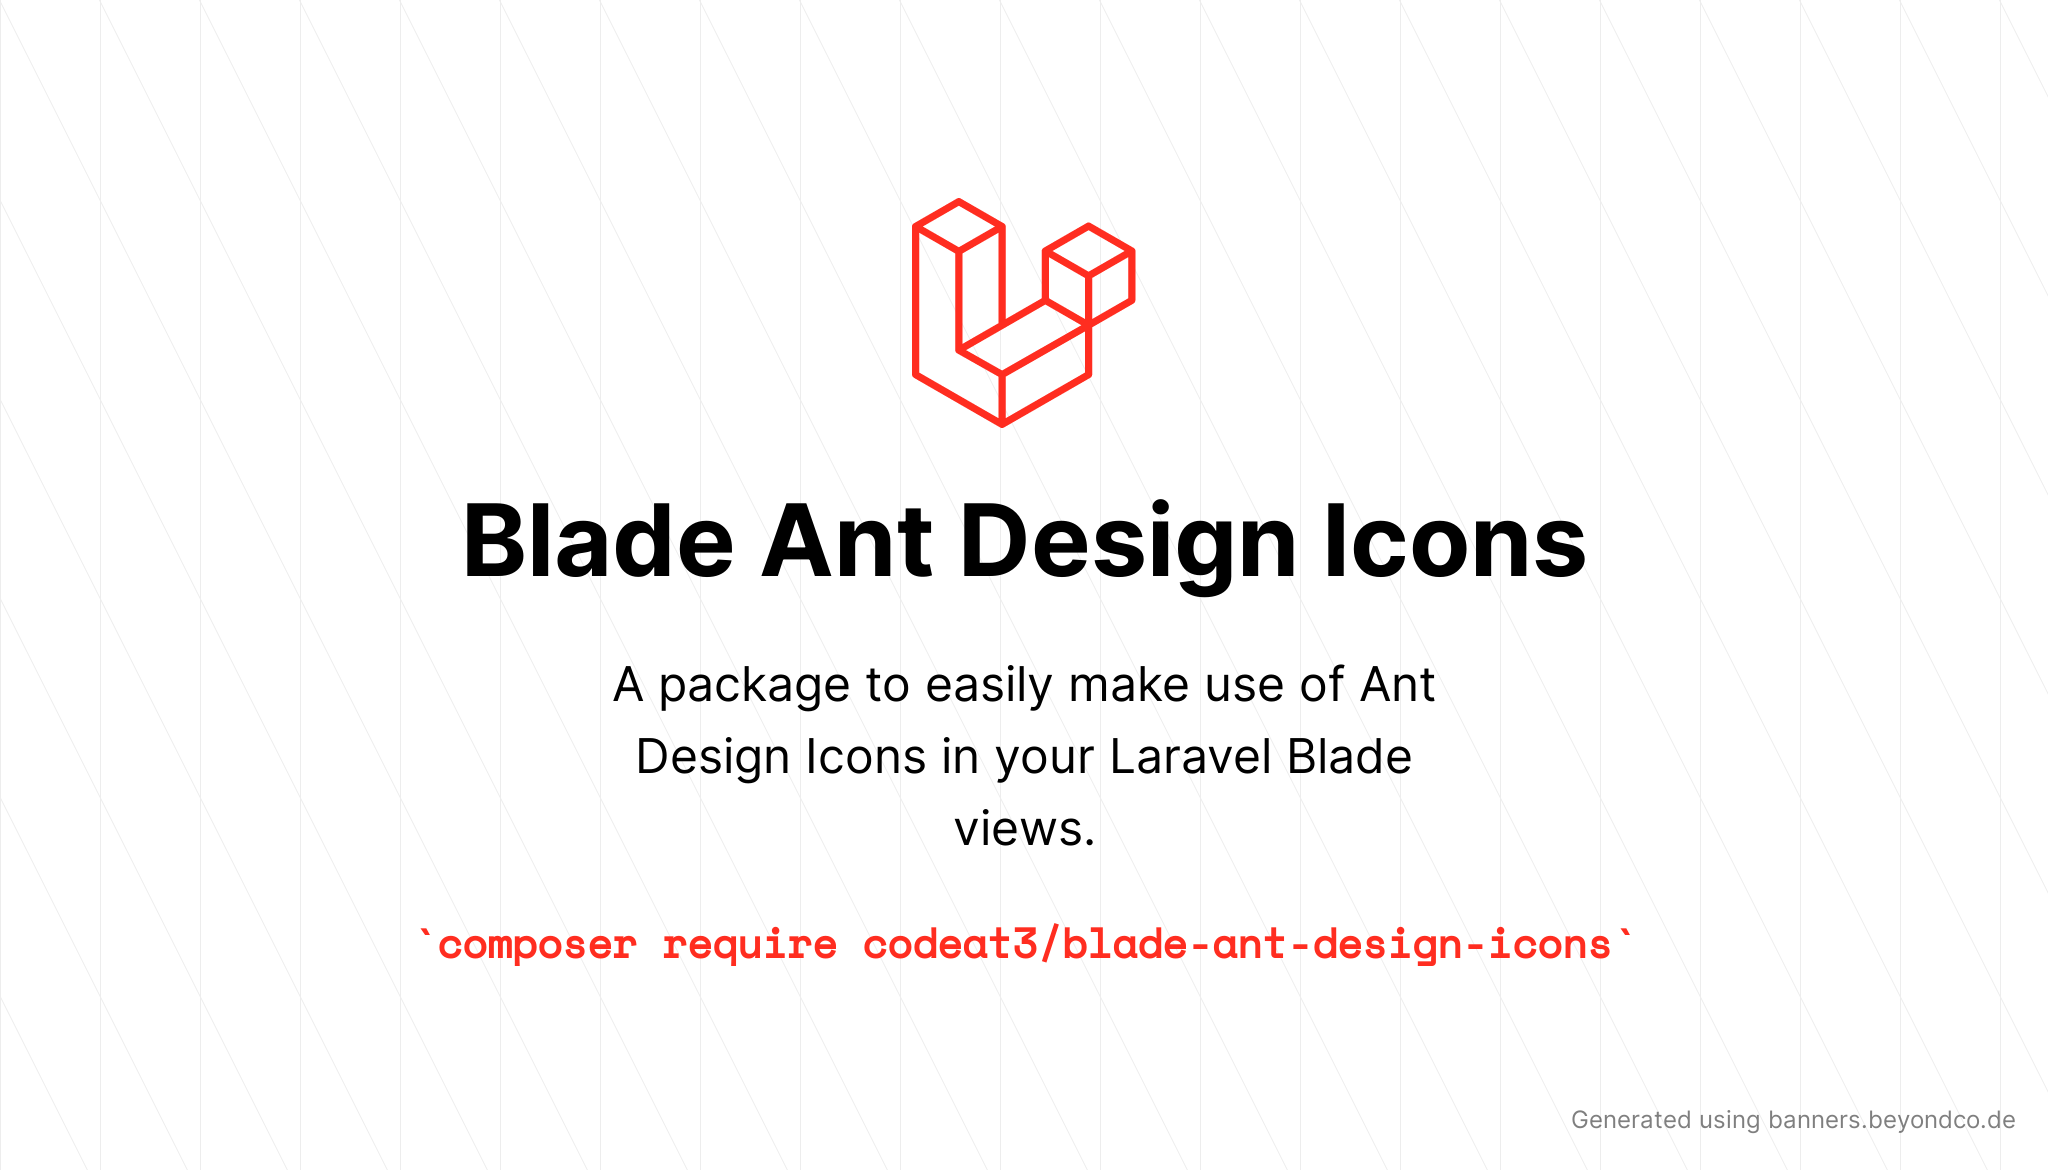 socialcard-blade-ant-design-icons.png